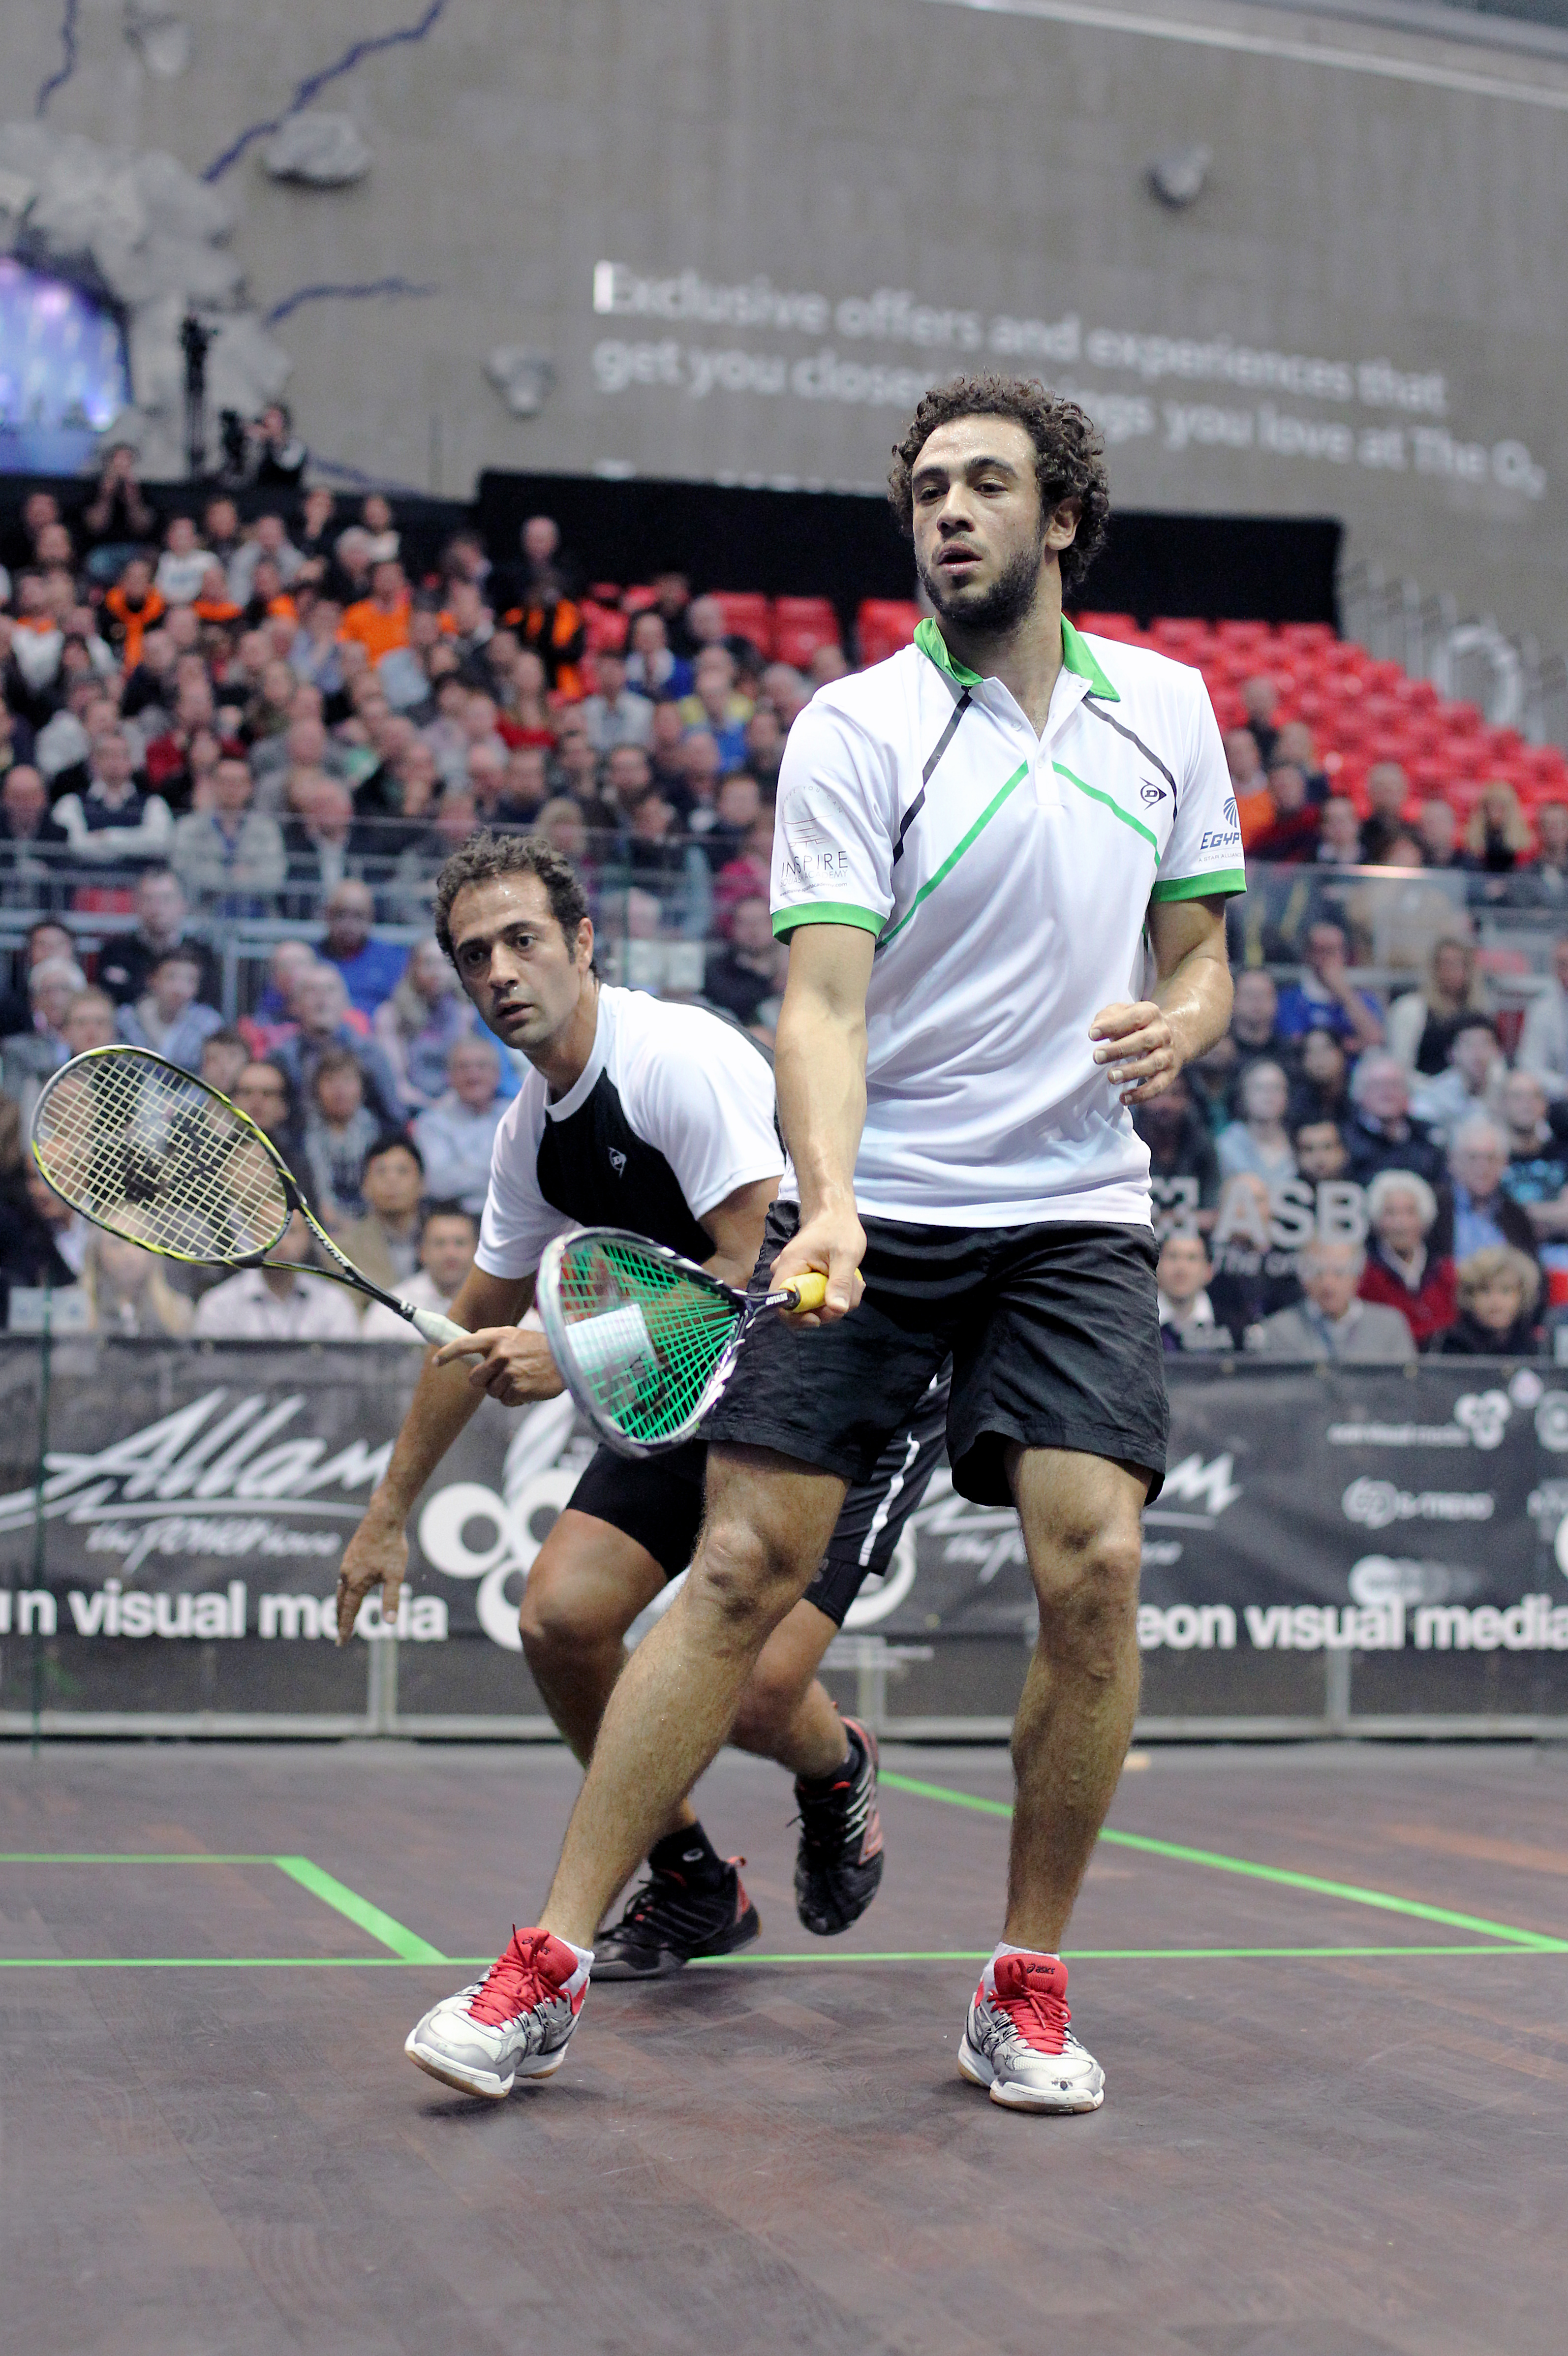 Eight years after his only trip to the finals of the British Open, Egypt’s Amr Shabana (L) recovered from dropping the first two games of his quarterfinal this year against countryman Ramy Ashour but couldn’t secure his spot in the semis, dropping the decider 11-4.